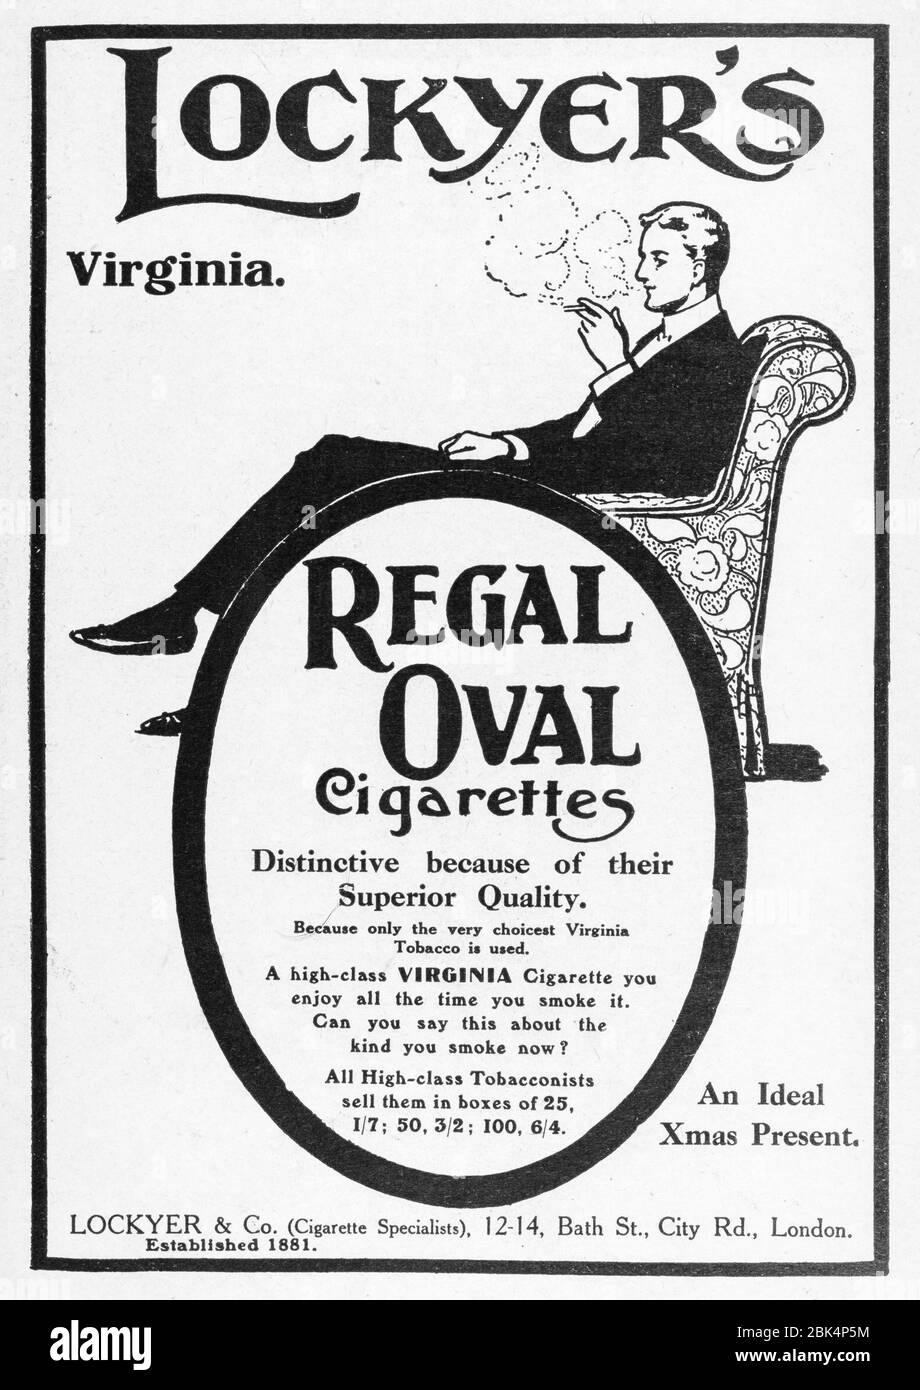 Old vintage tobacco / cigarette / smoking advert from early 1900's, before dawn of advertising standards. History of advertising, old tobacco adverts Stock Photo